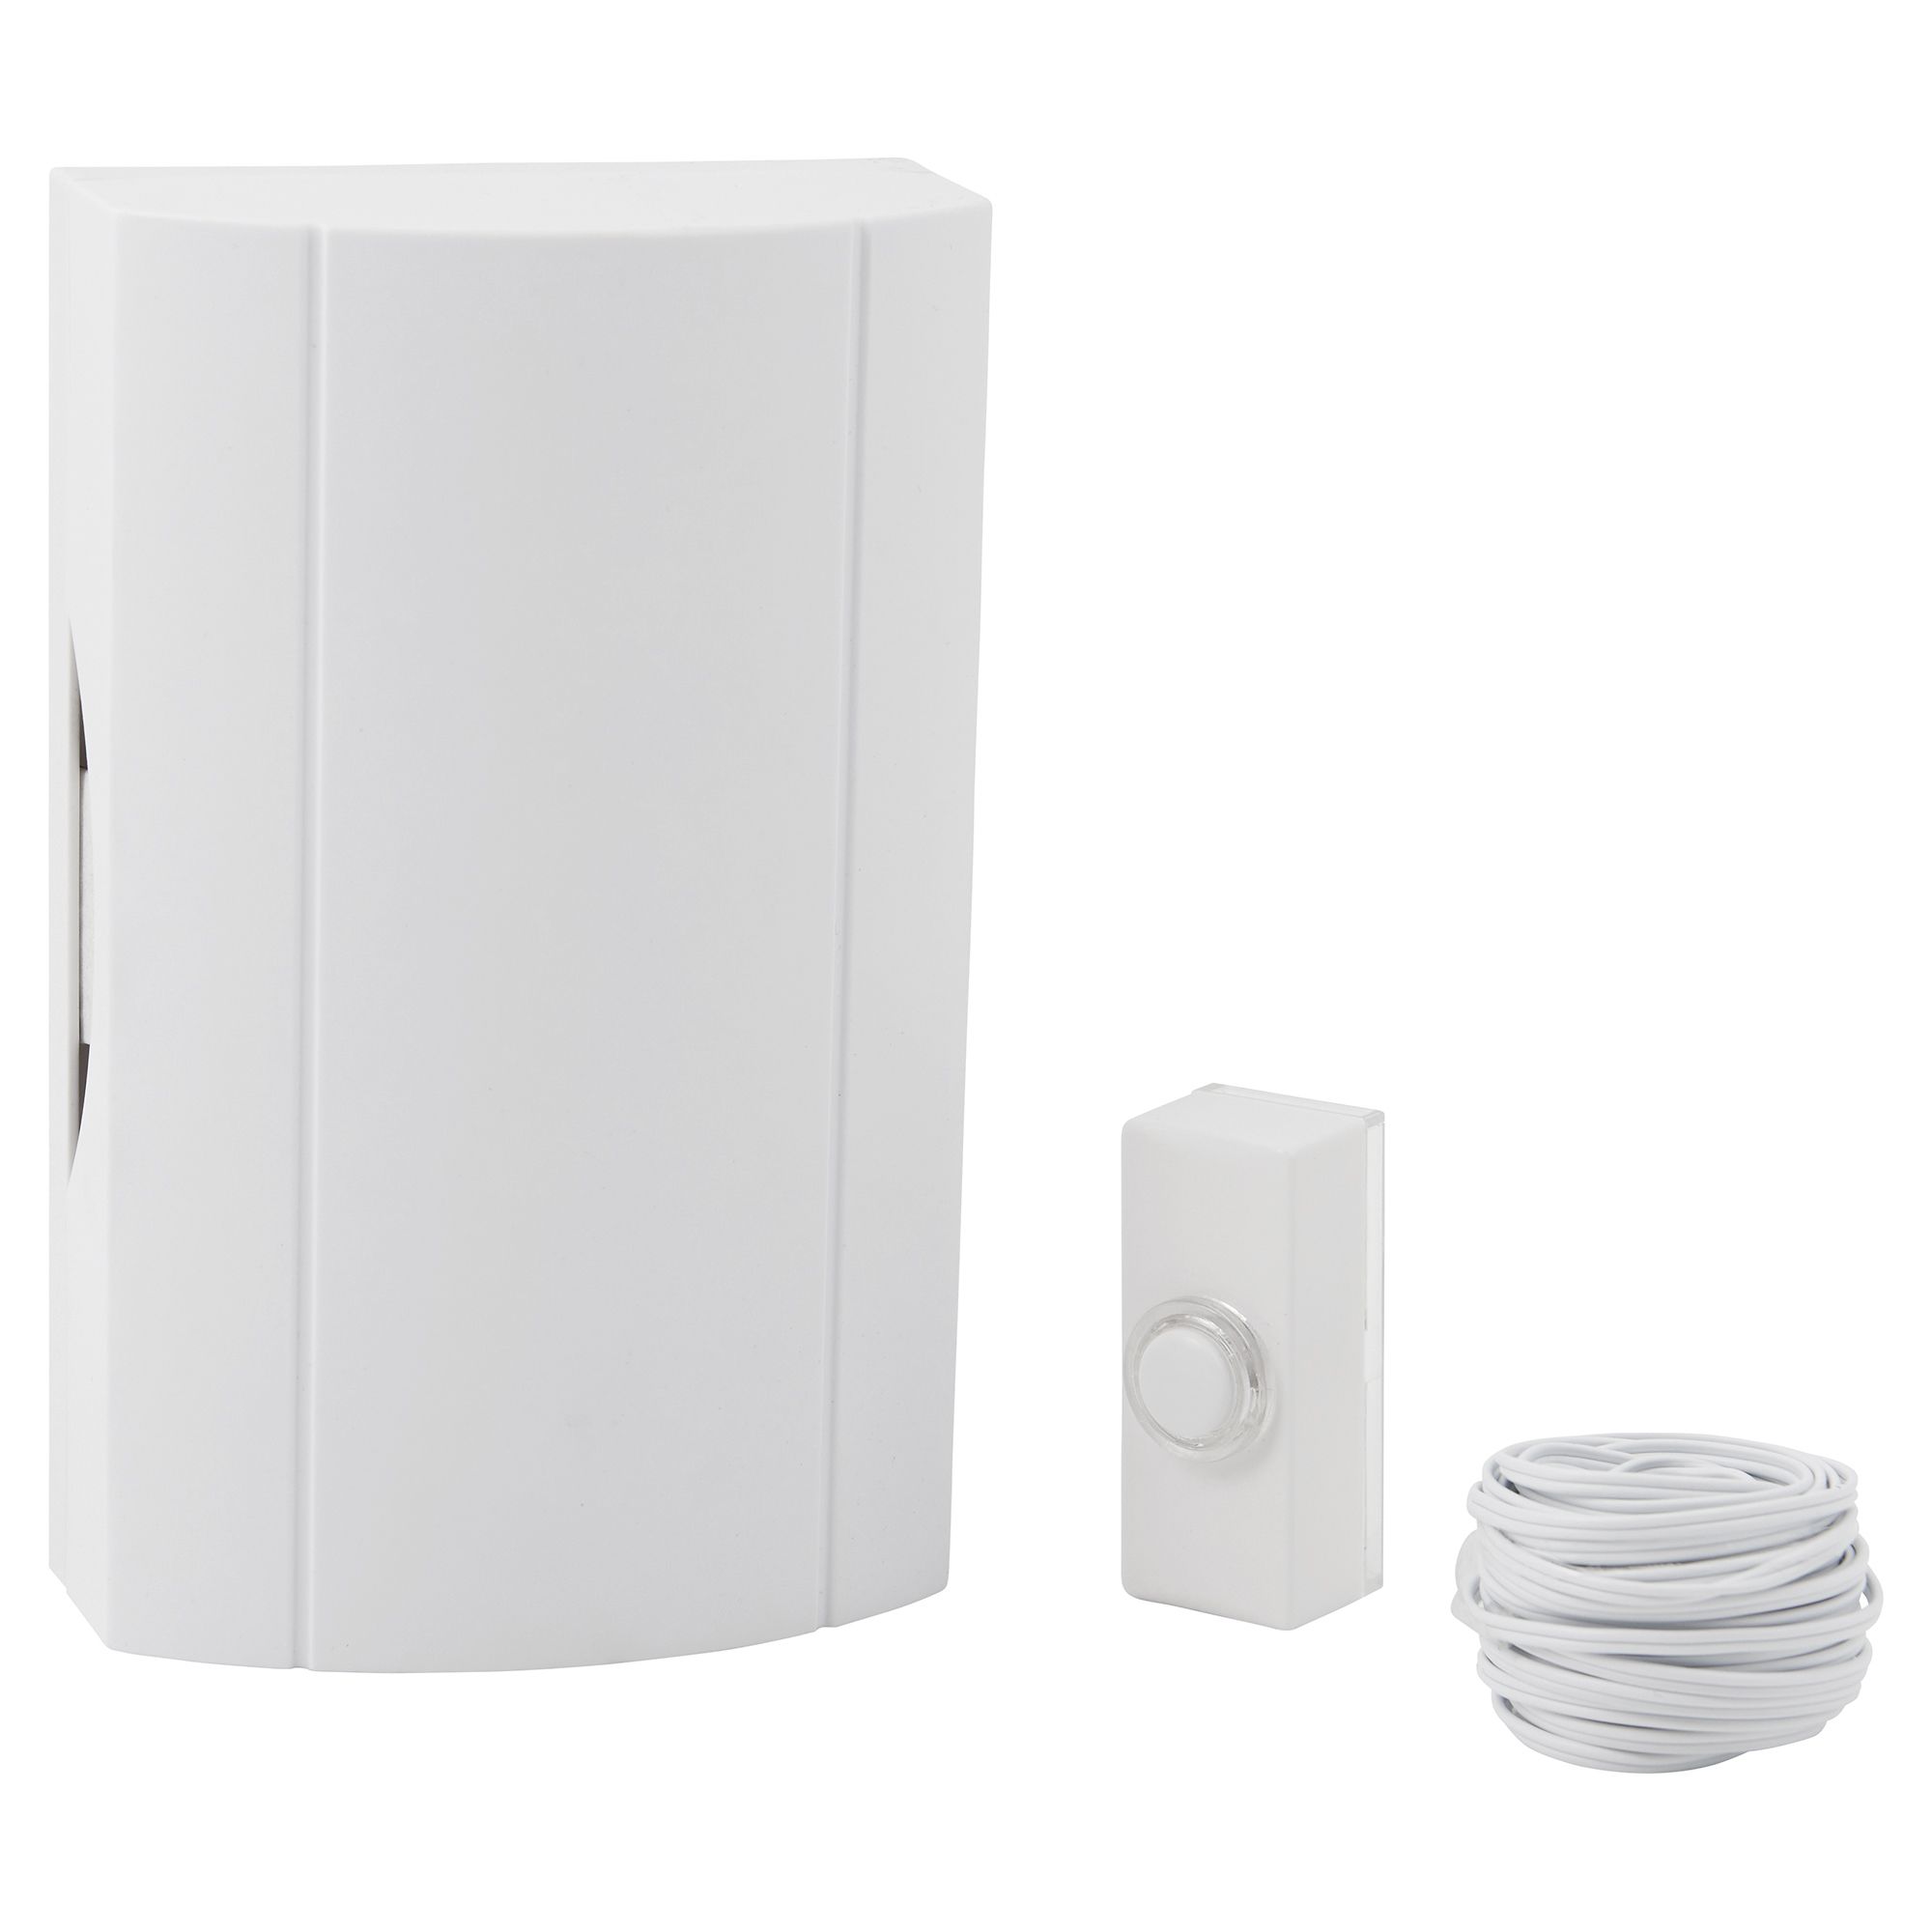 Byron White Wired Door chime kit